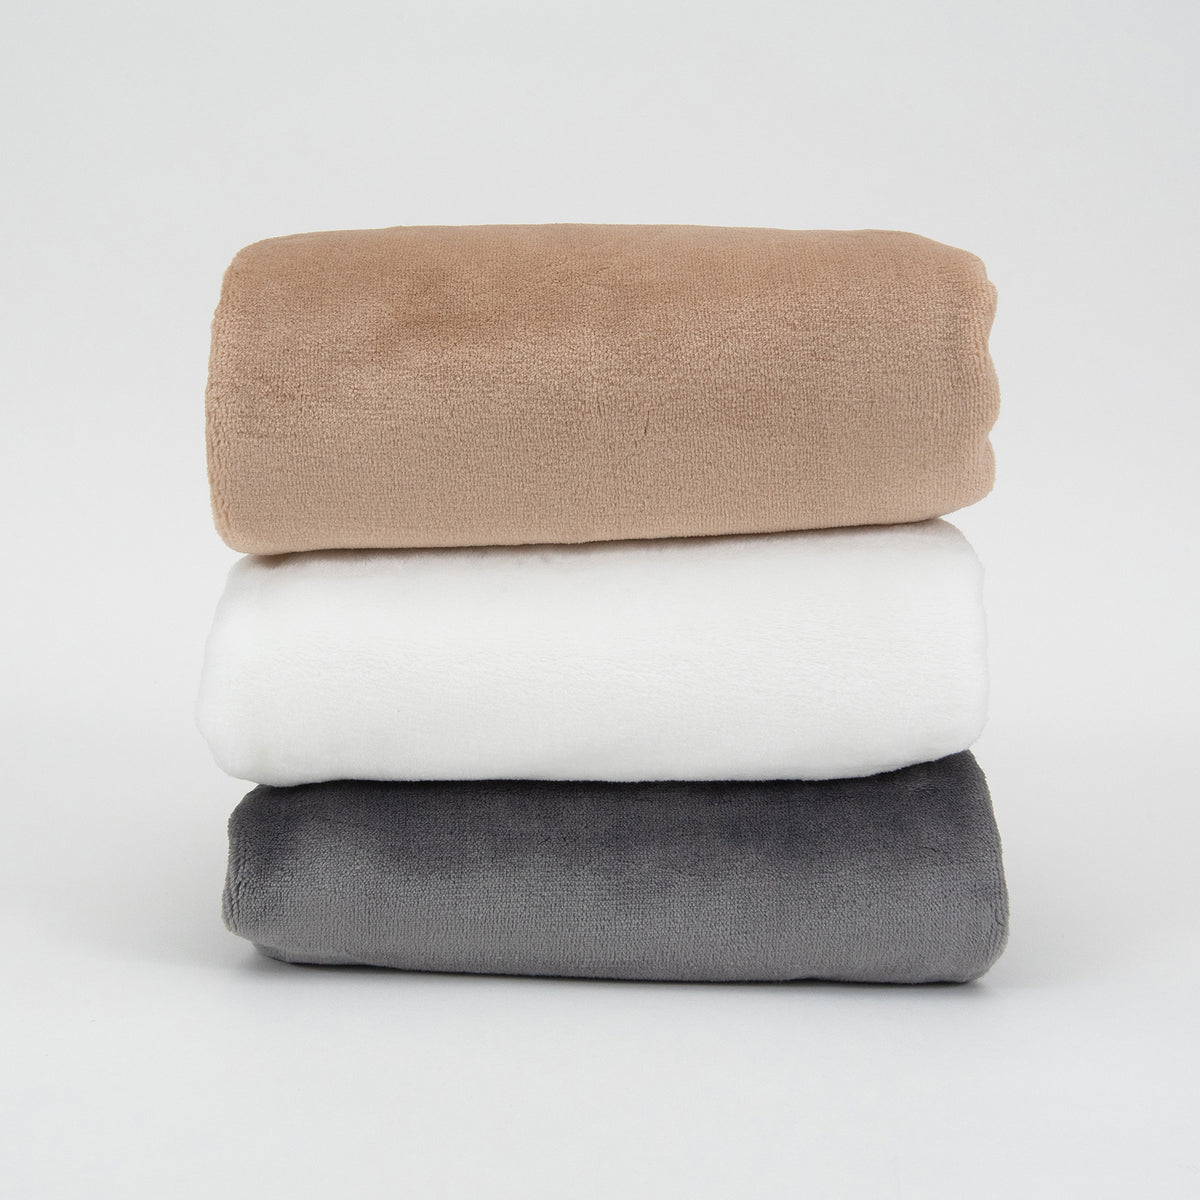 Stack of Latte, Pure White, and Charcoal Fleece Blankets - Luster Loft - American Blanket Company